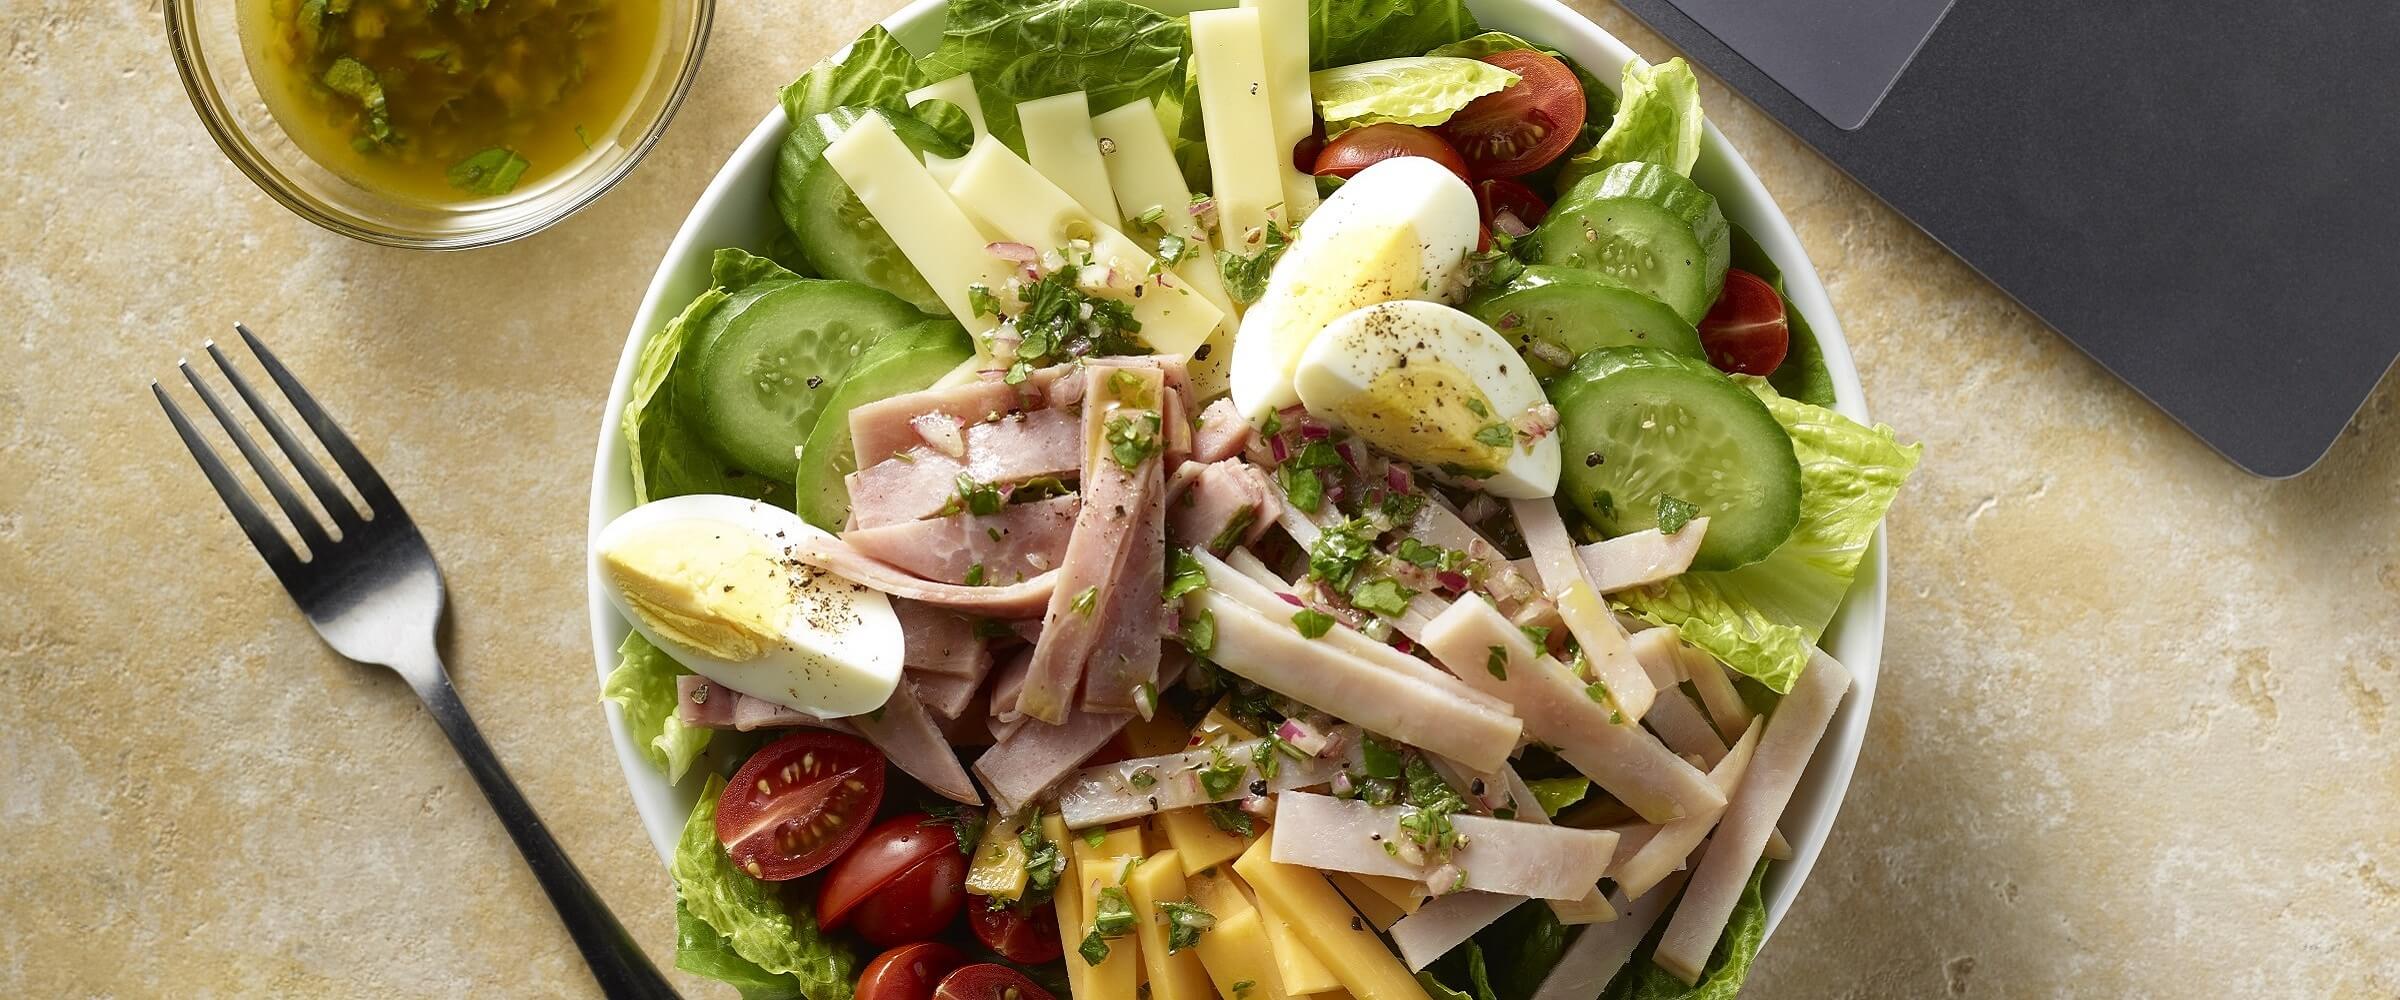 Chef salad in white bowl with dressing on the side